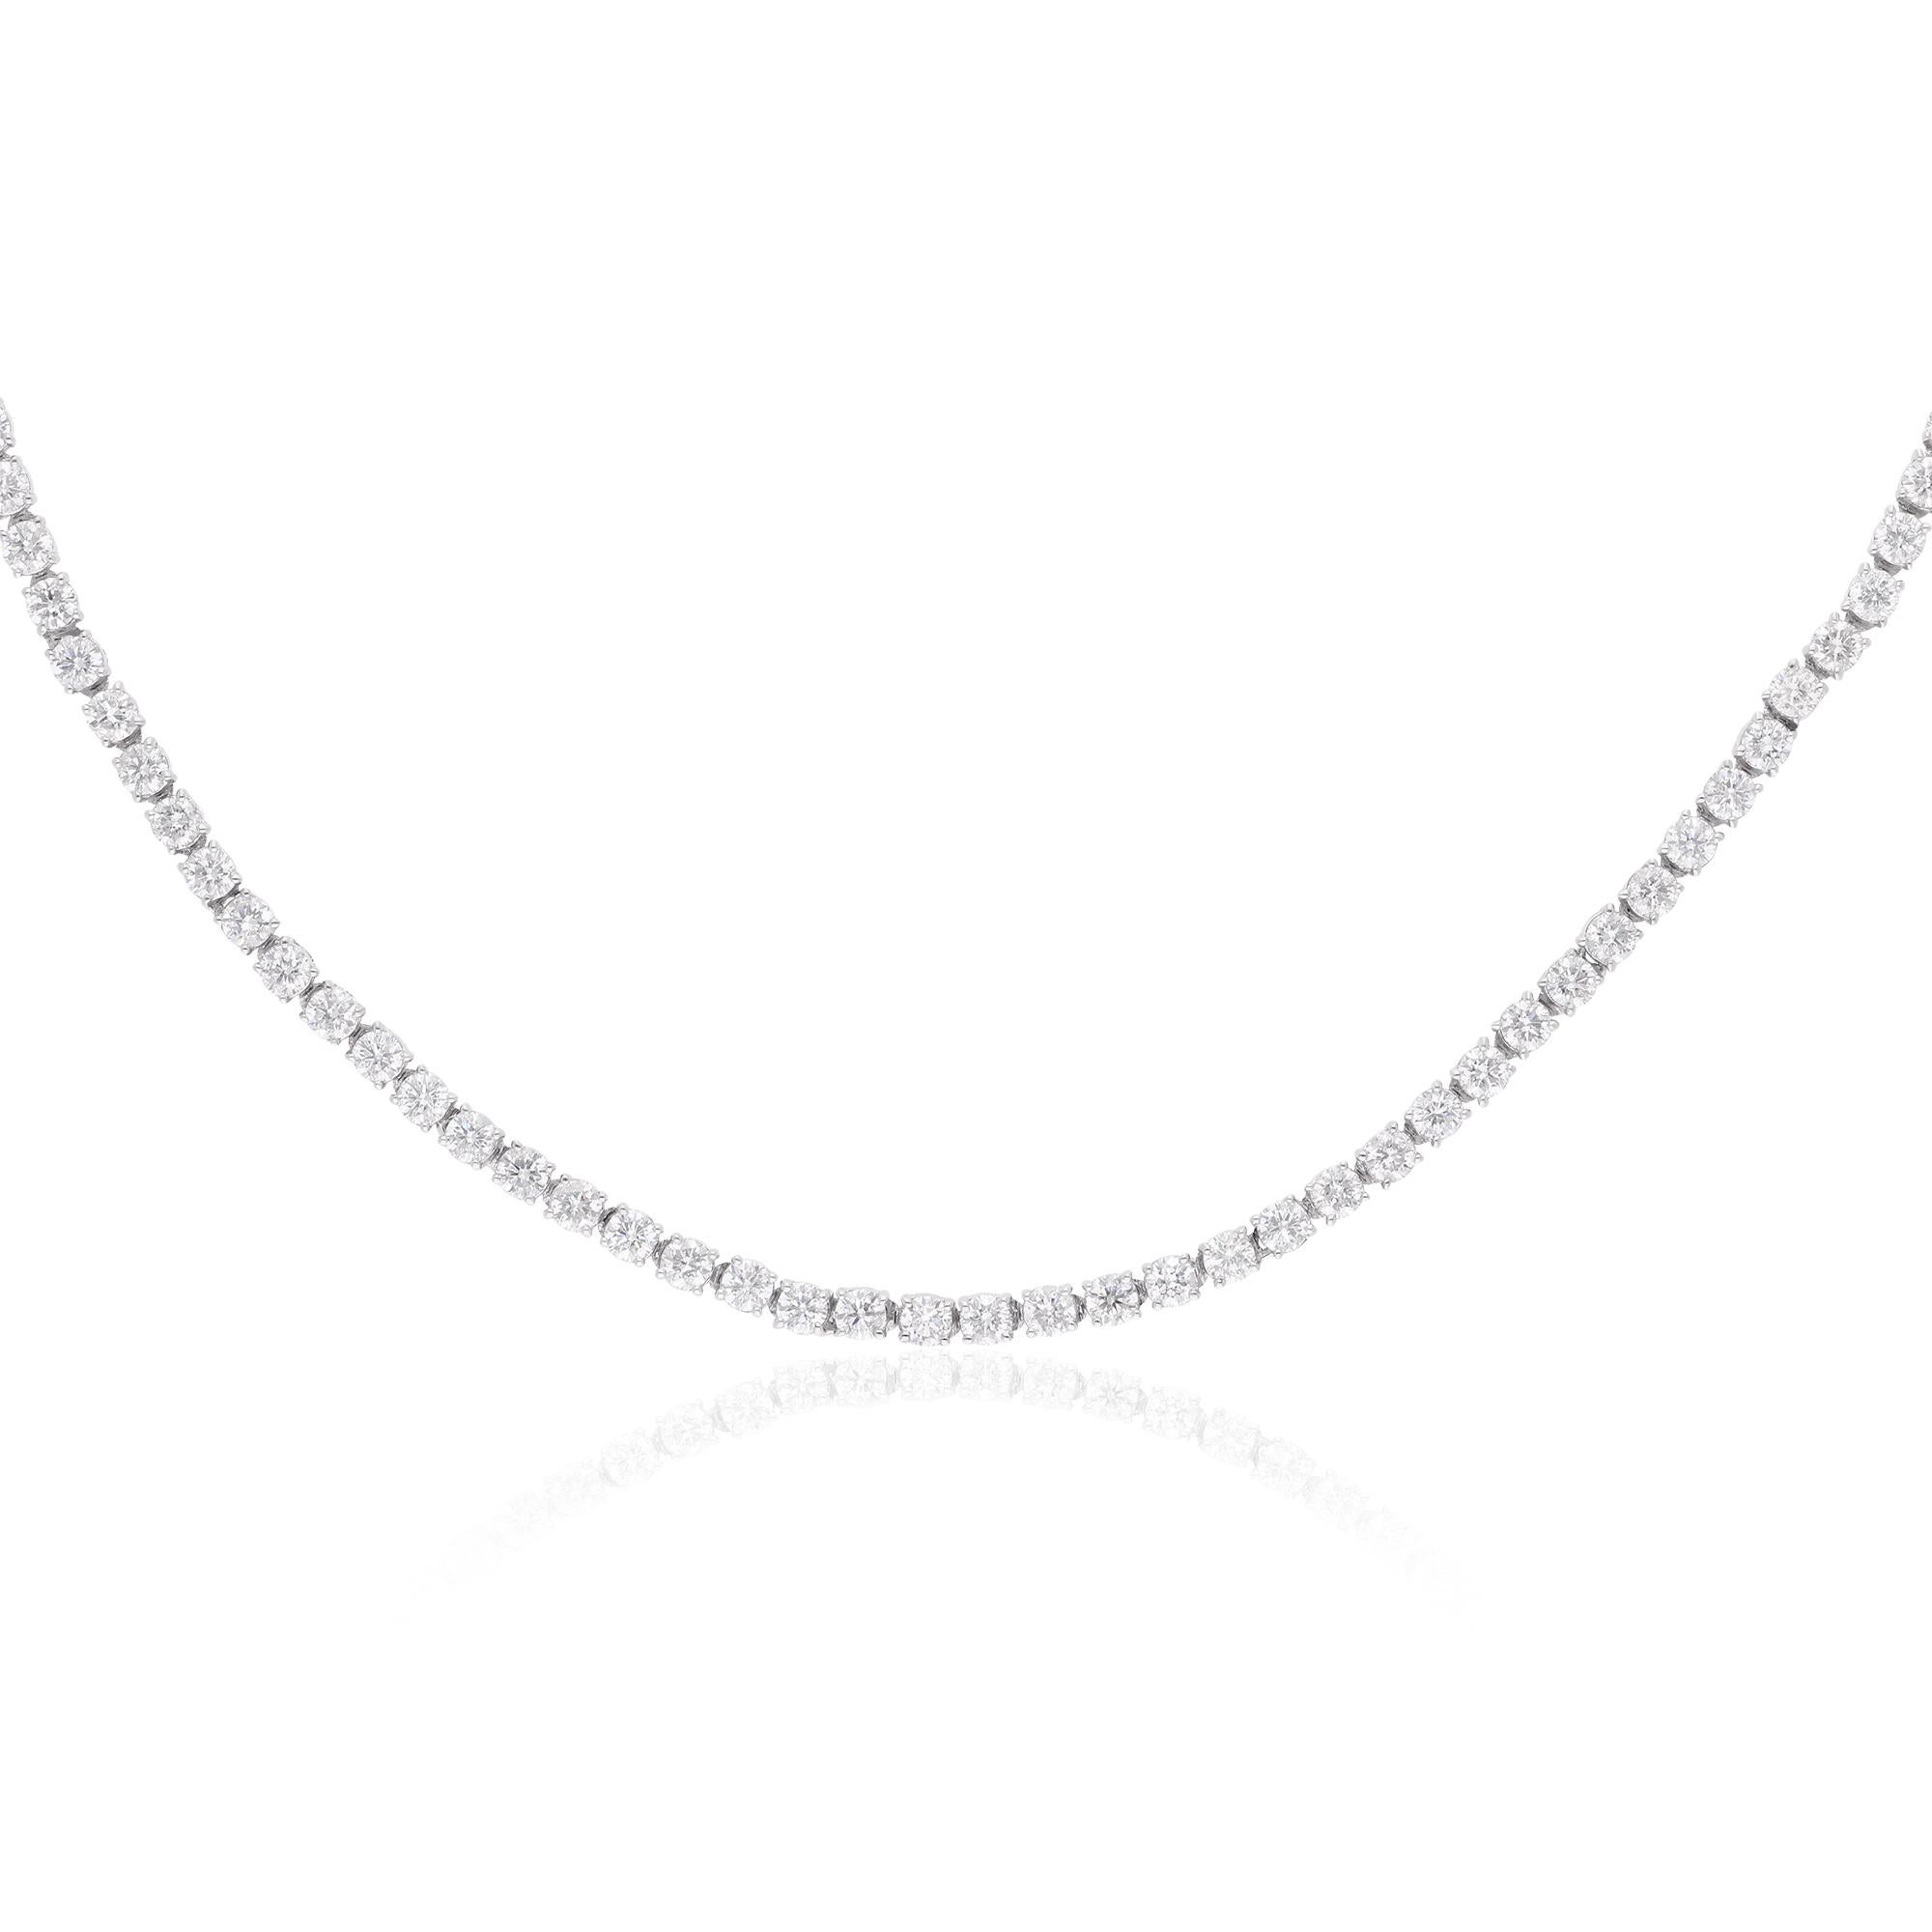 Experience the breathtaking allure of this Natural 3.81 Carat Round Diamond Necklace, meticulously crafted in solid 14 karat white gold. This exquisite piece of fine jewelry is a true testament to elegance and sophistication, destined to adorn your